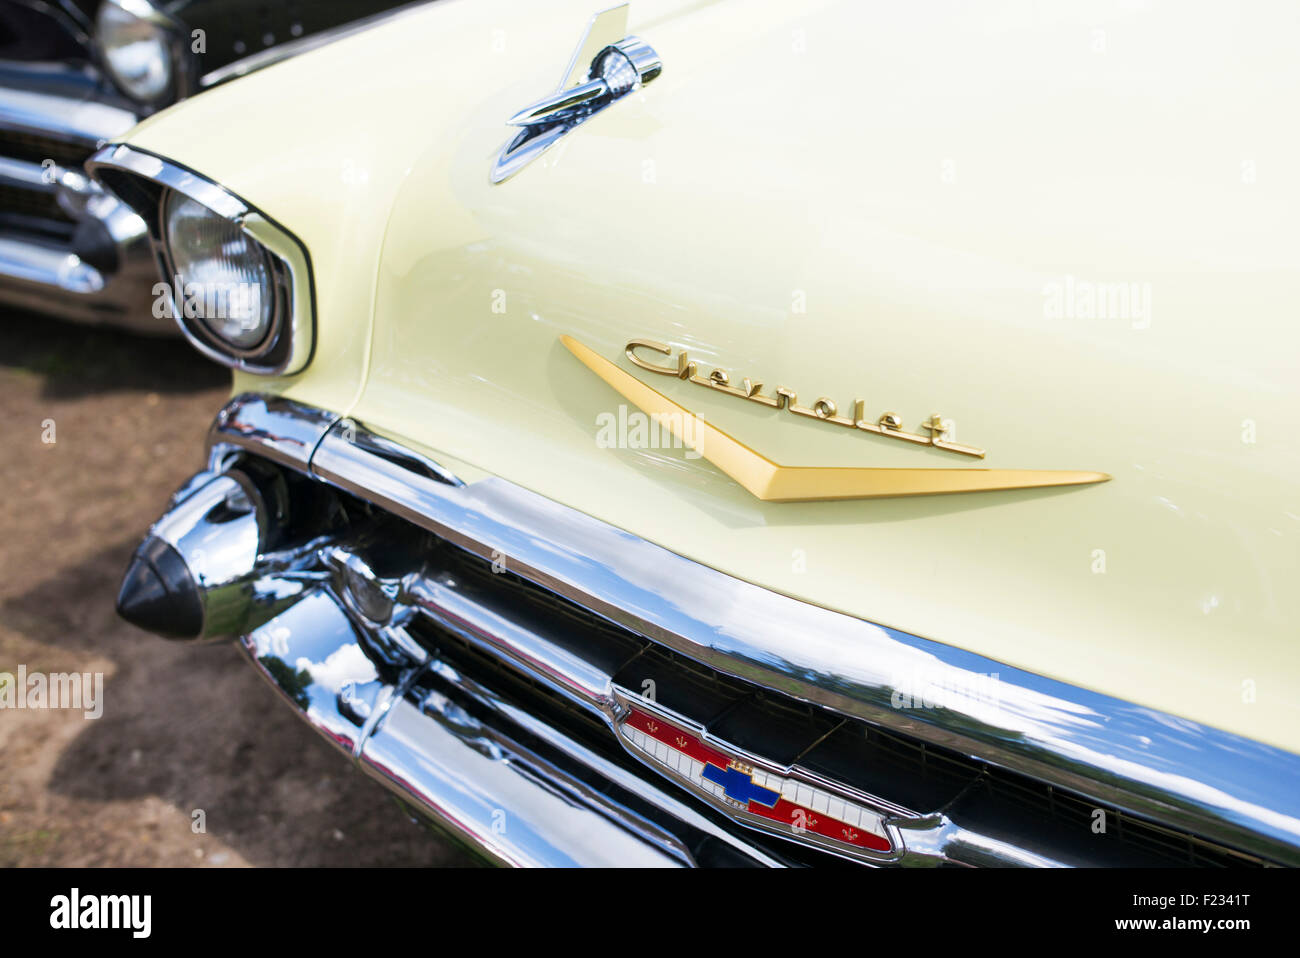 1957 Chevrolet, Bel Air. Chevy. Classic American car Stock Photo